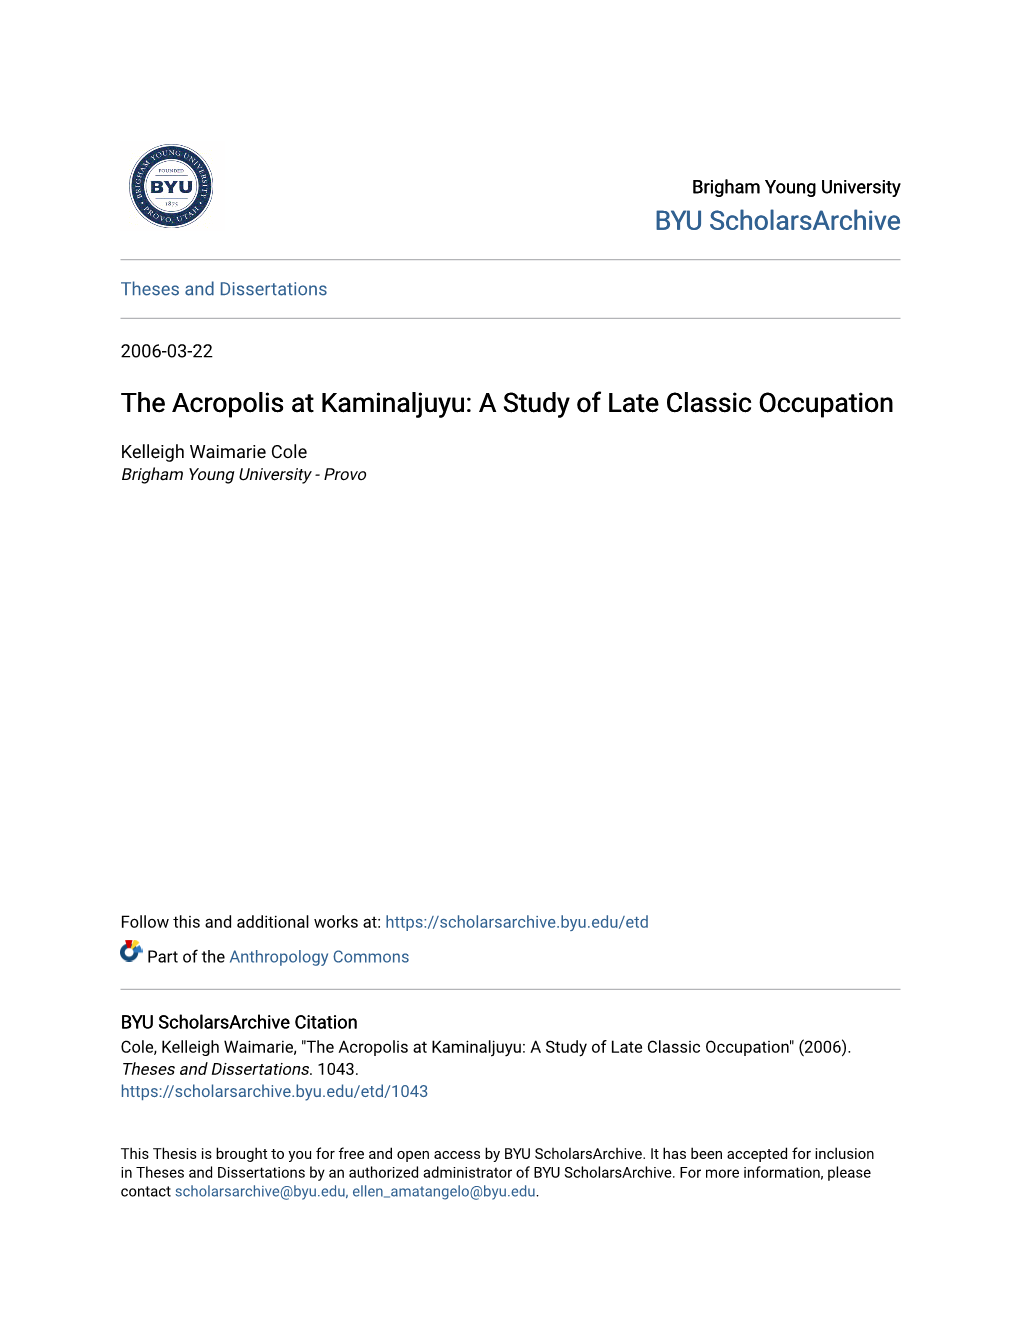 The Acropolis at Kaminaljuyu: a Study of Late Classic Occupation